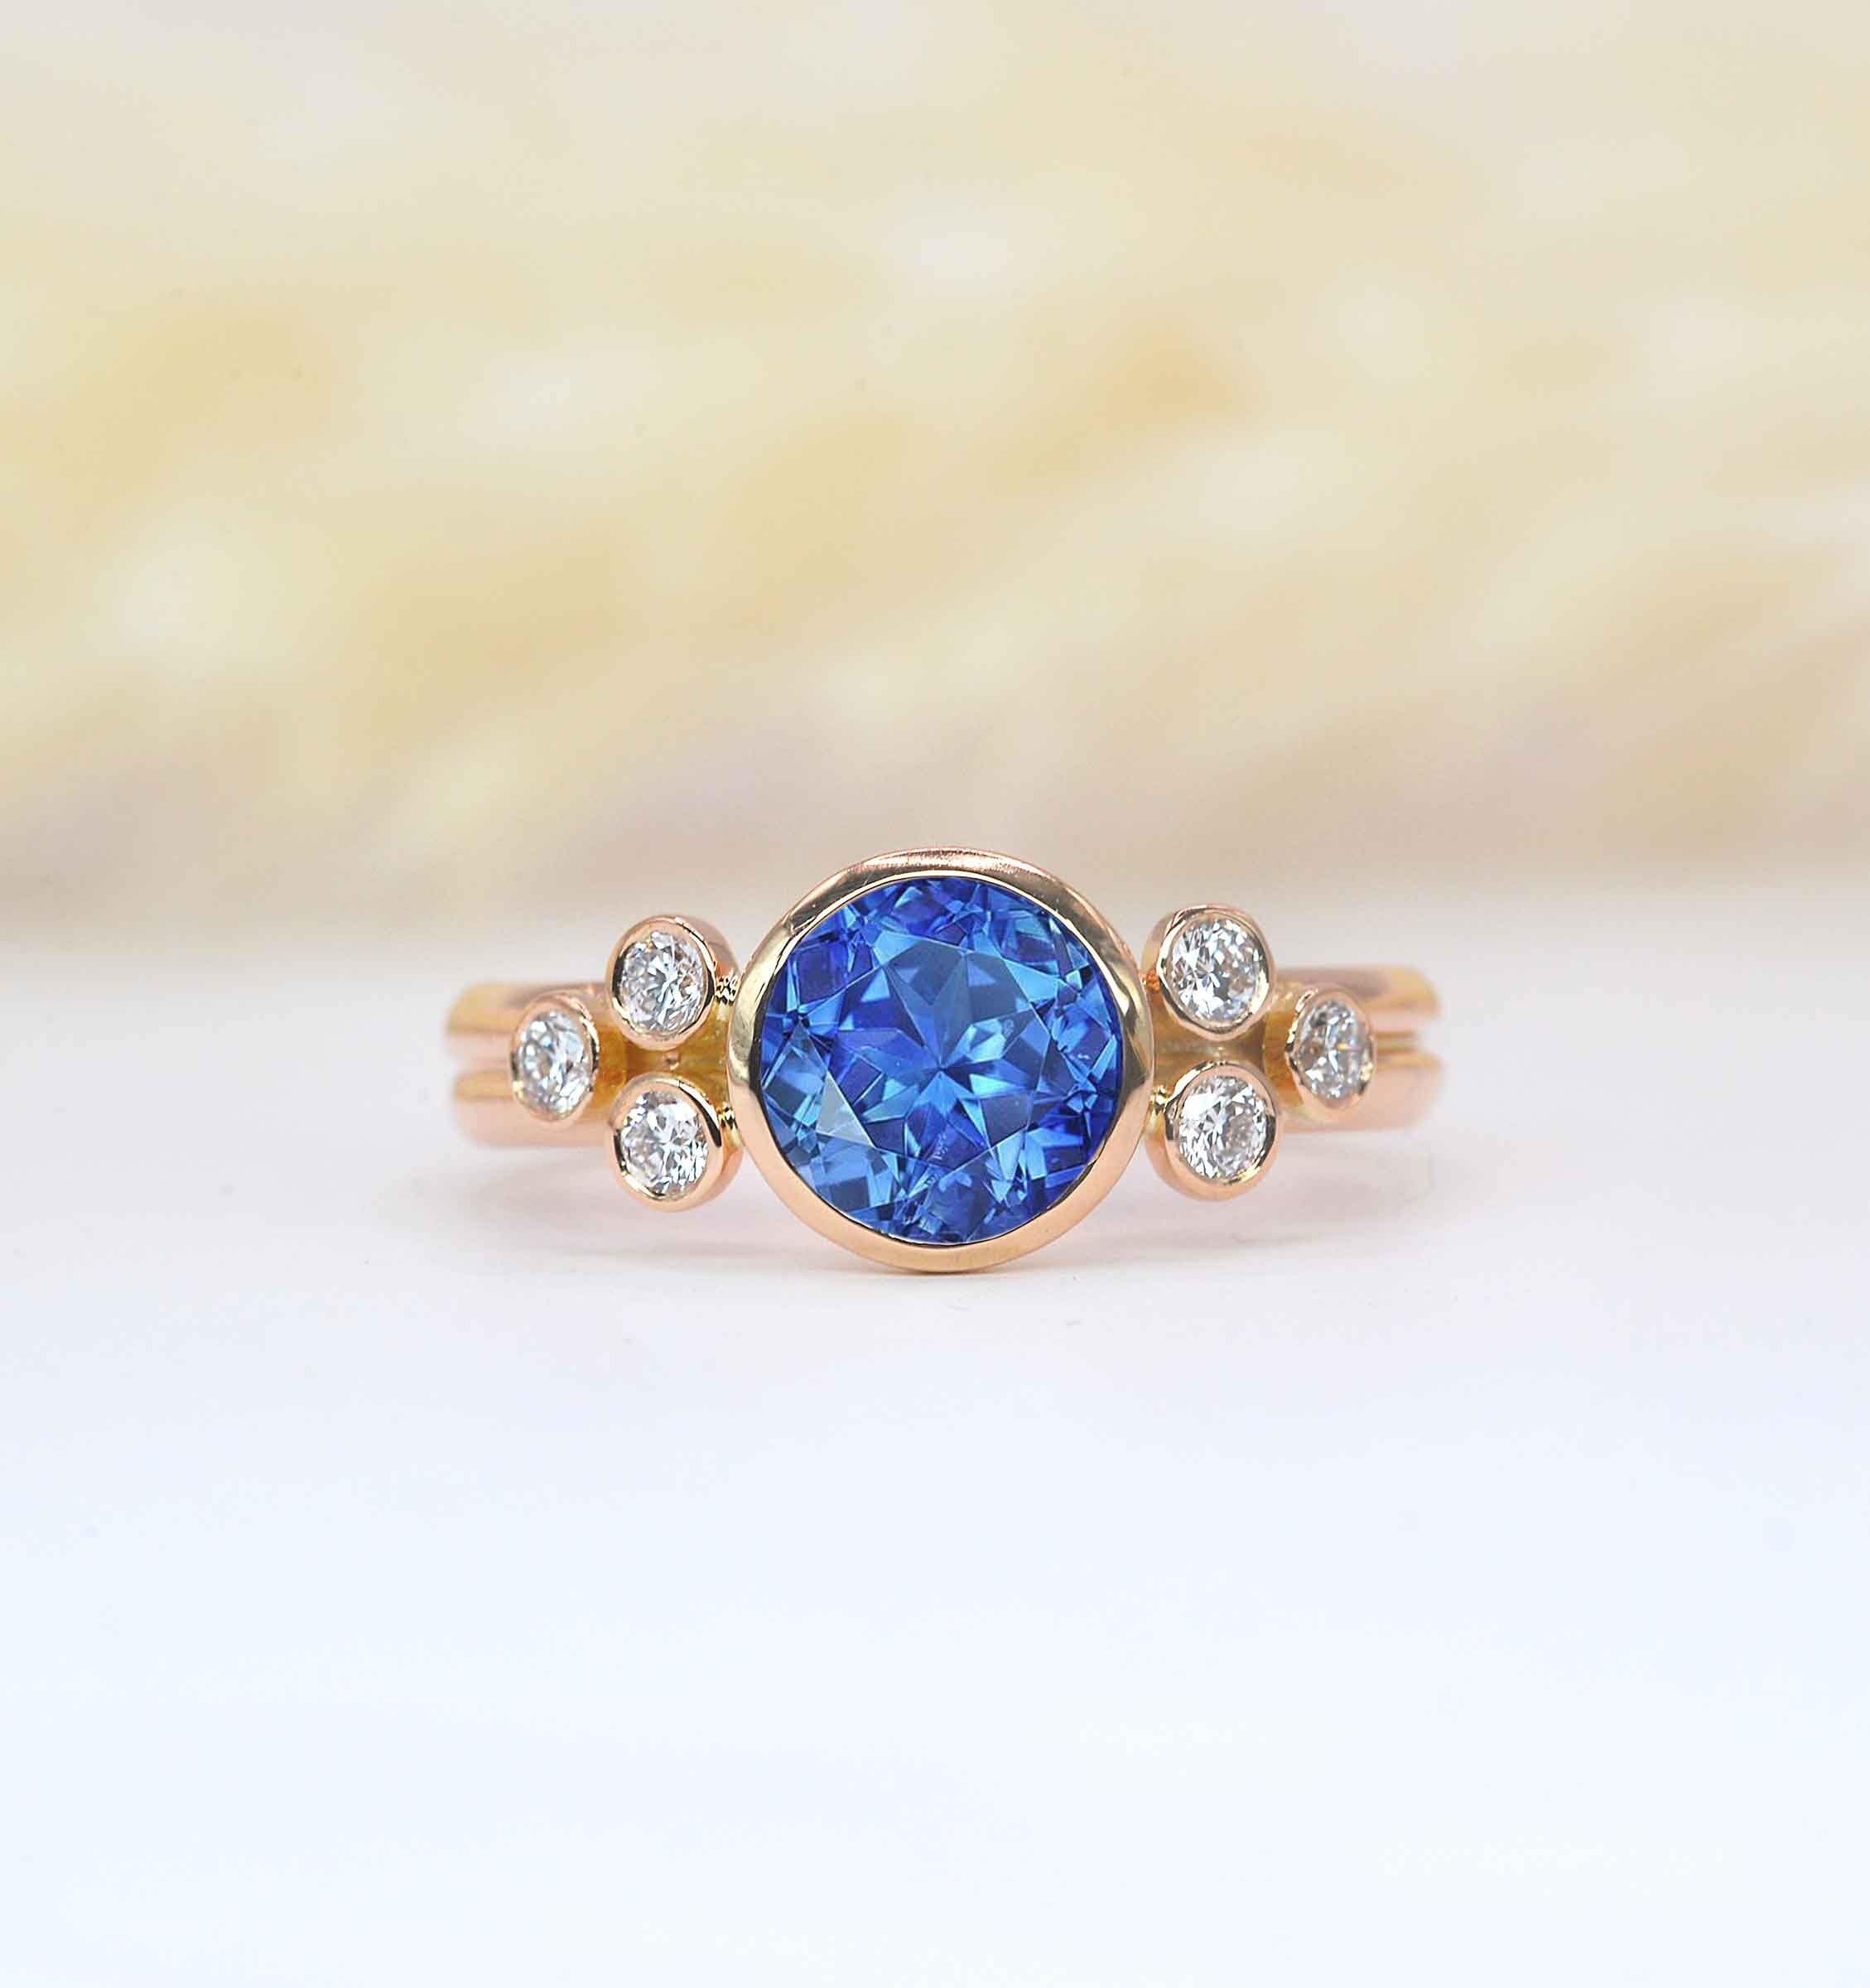 Blue Sapphire Featuring Diamond Cluster Ring | Art Deco Vintage Anniversary, Engagement, Birthday Gift For Love